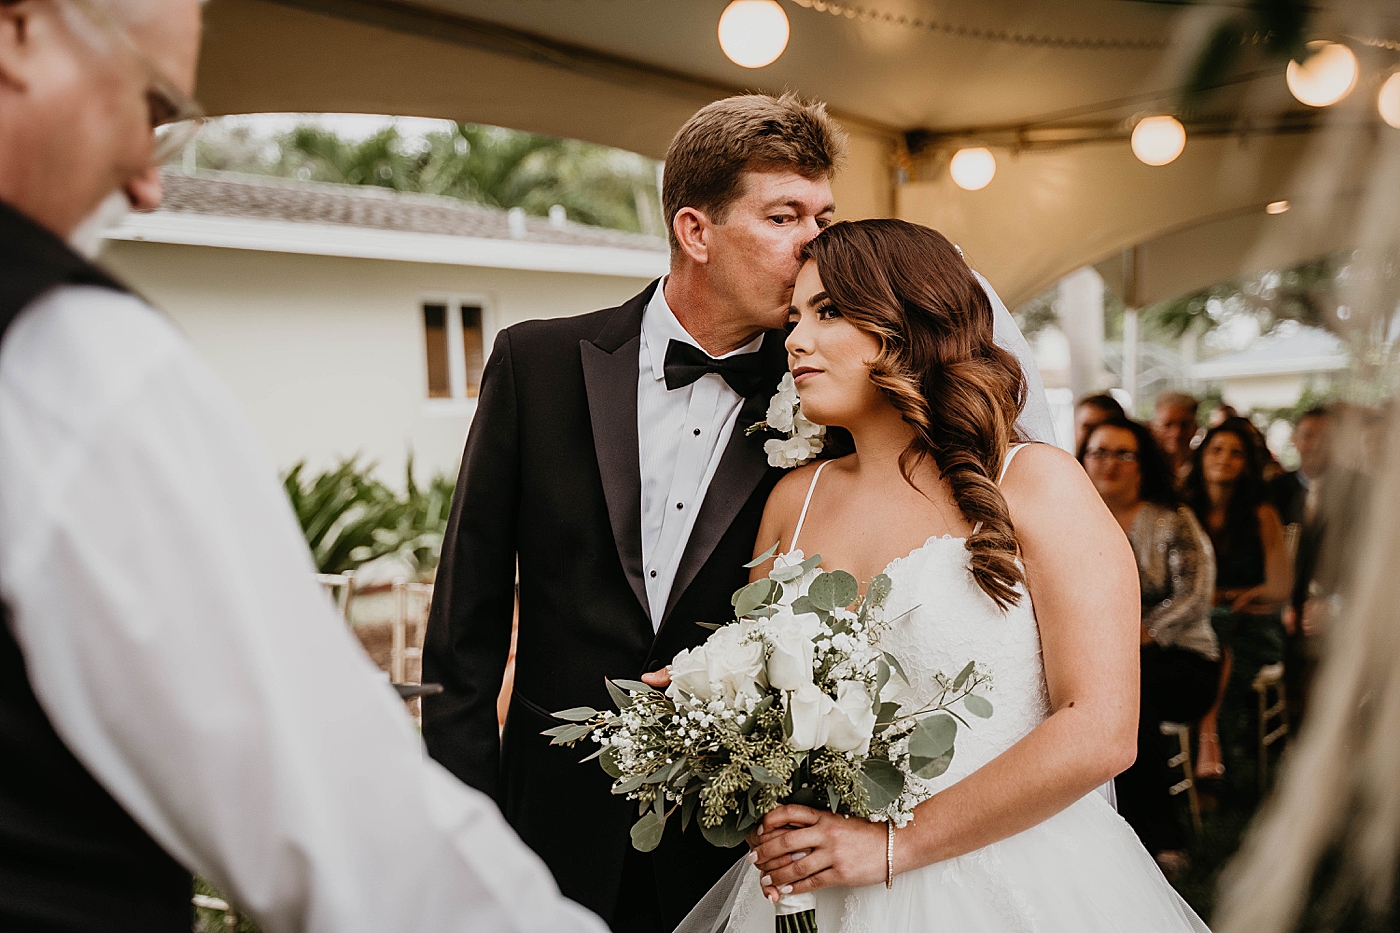 Bride and Groom intimate Ceremony Intimate South Florida Wedding Photography captured by Wedding Photographer Krystal Capone Photography